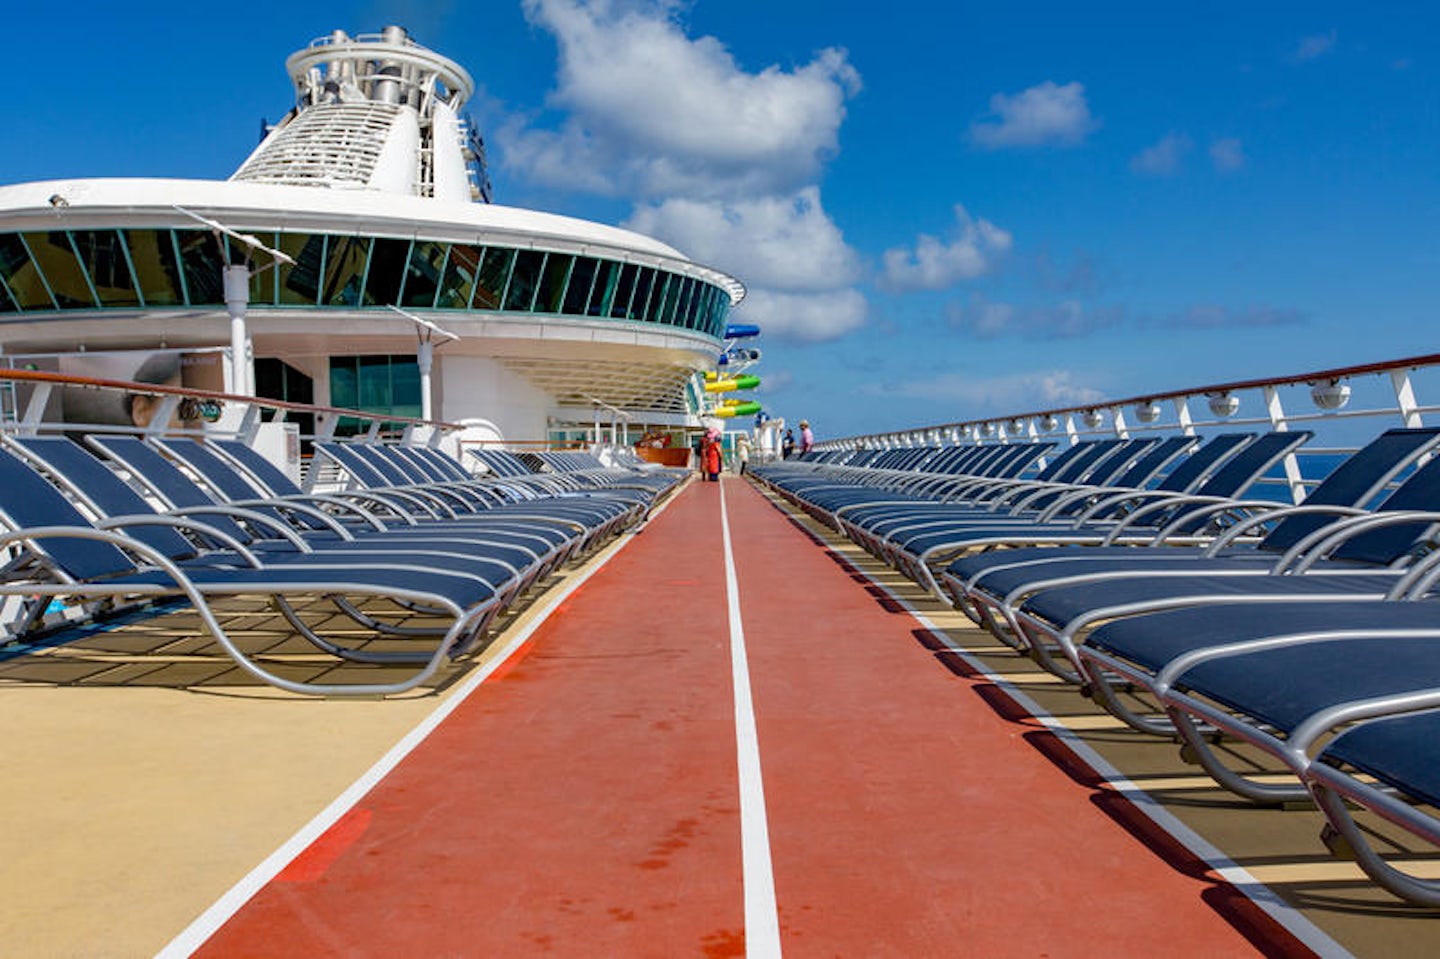 Jogging Track on Mariner of the Seas